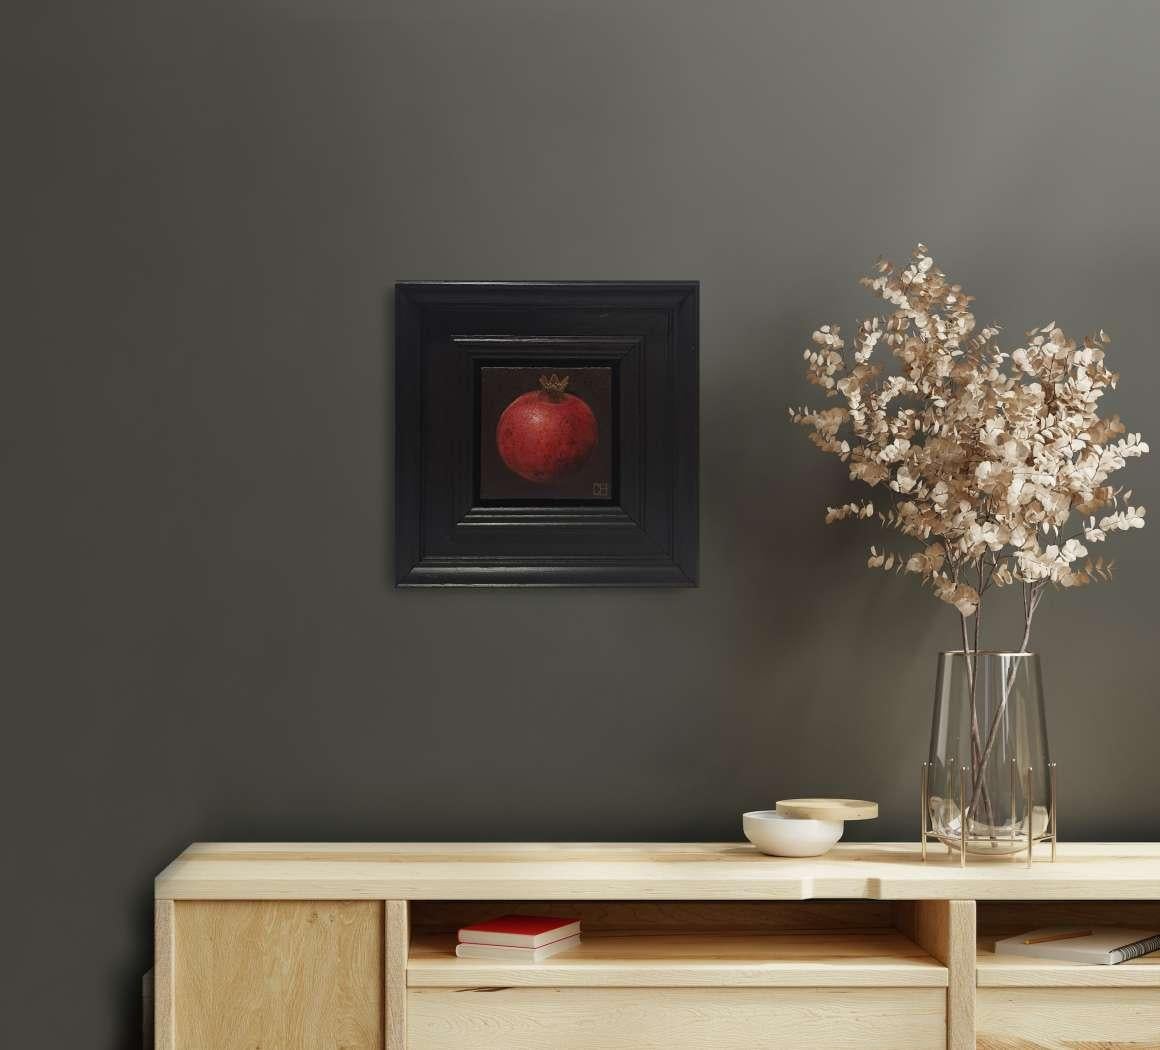 Pocket Pinky Red Pomegranate is an original oil painting by Dani Humberstone as part of her Pocket Painting series featuring small scale realistic oil paintings, with a nod to baroque still life painting. The paintings are set in a black wood